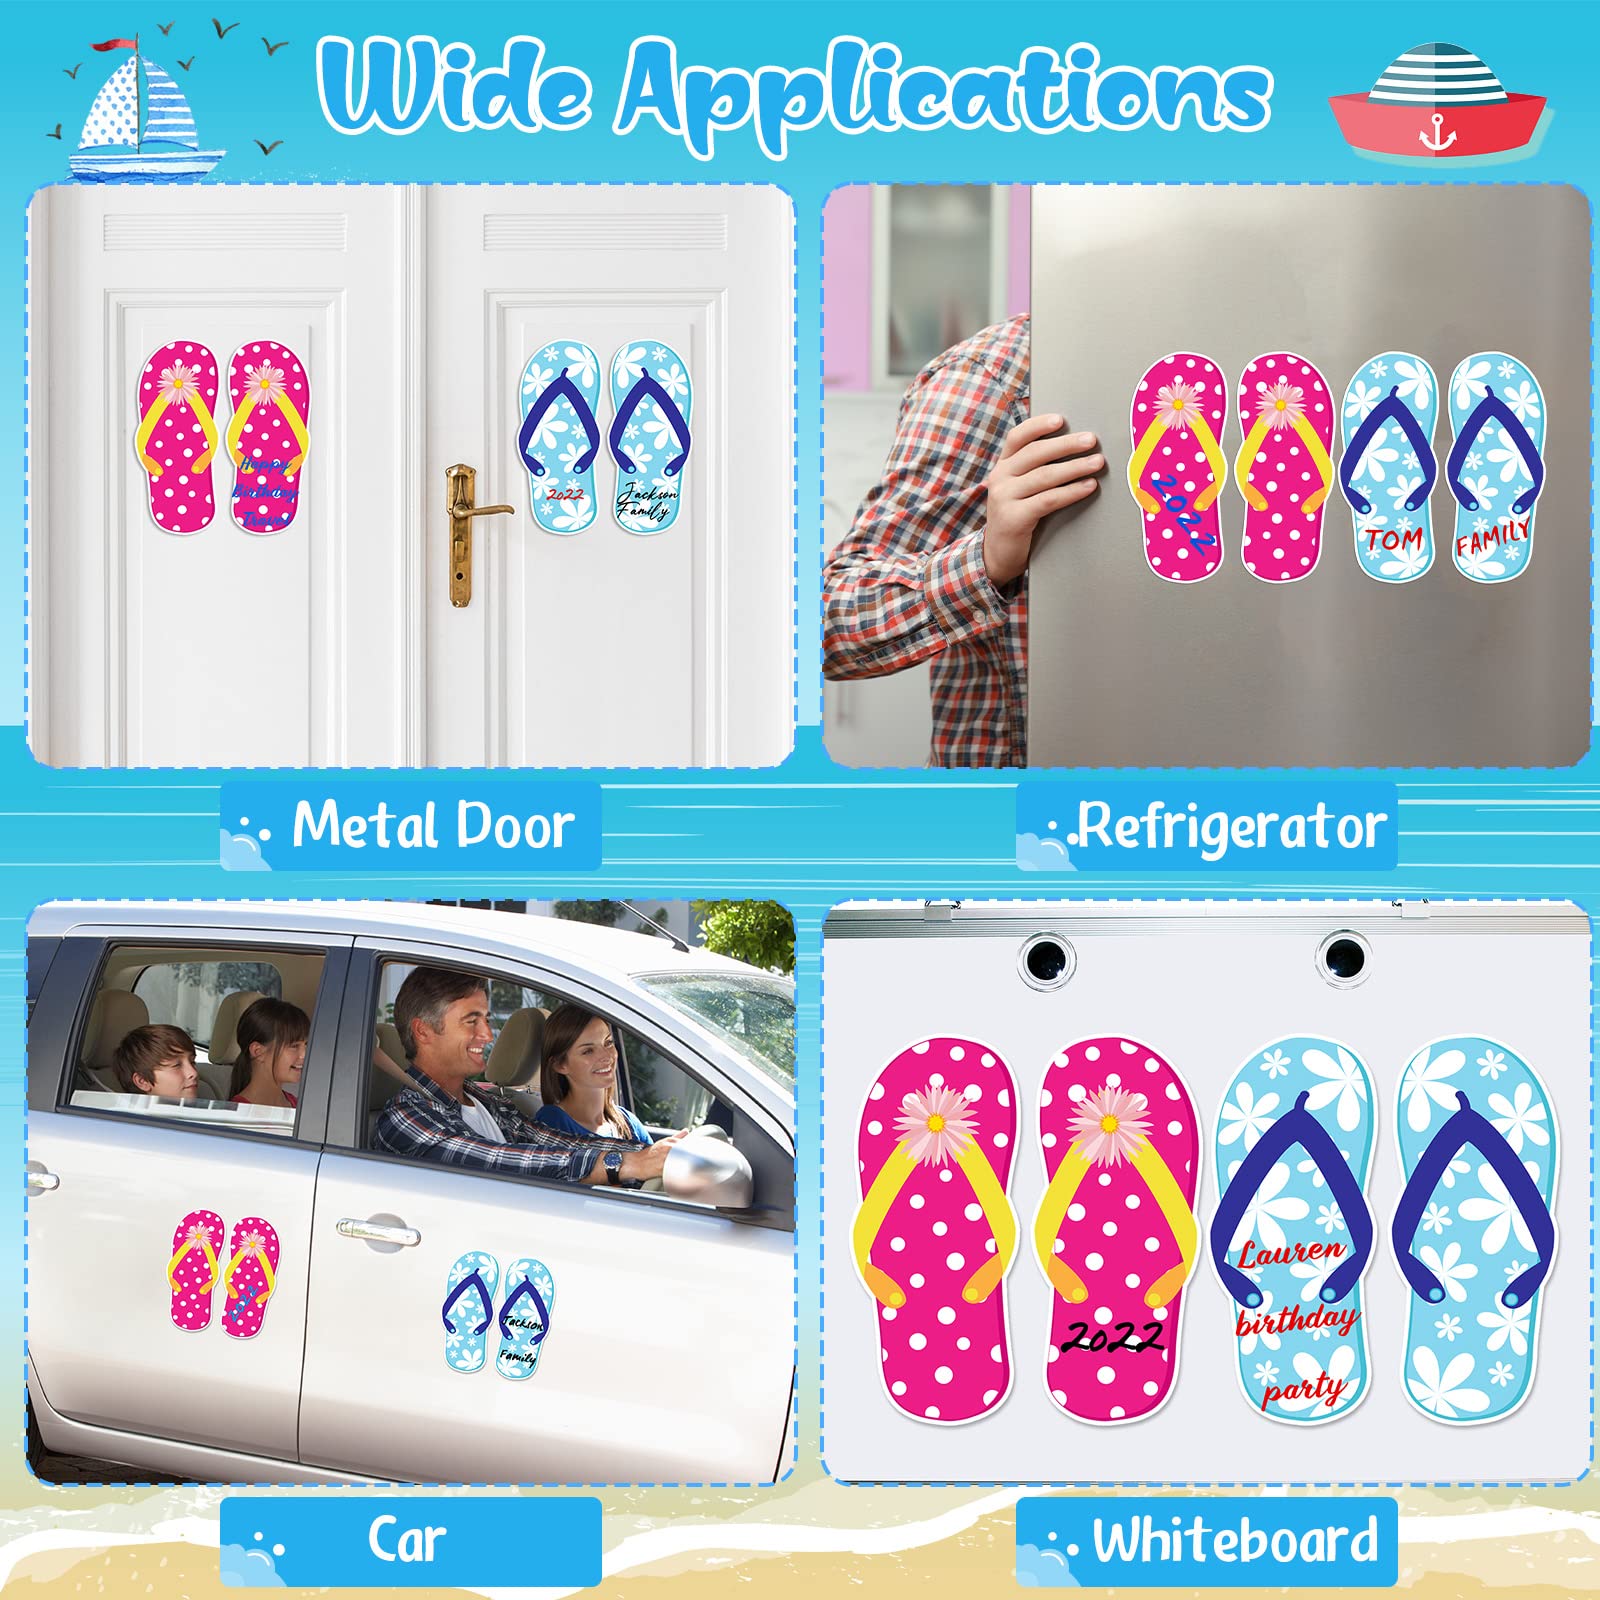 2 Pairs Cruise Door Magnet Hawaii Flip Flop Car Magnets with 3 Pcs Paint Pens Aloha Beach Stickers Nautical Cruise Door Decorations Door Magnets Fridge Decor for Carnival Cruise Refrigerator